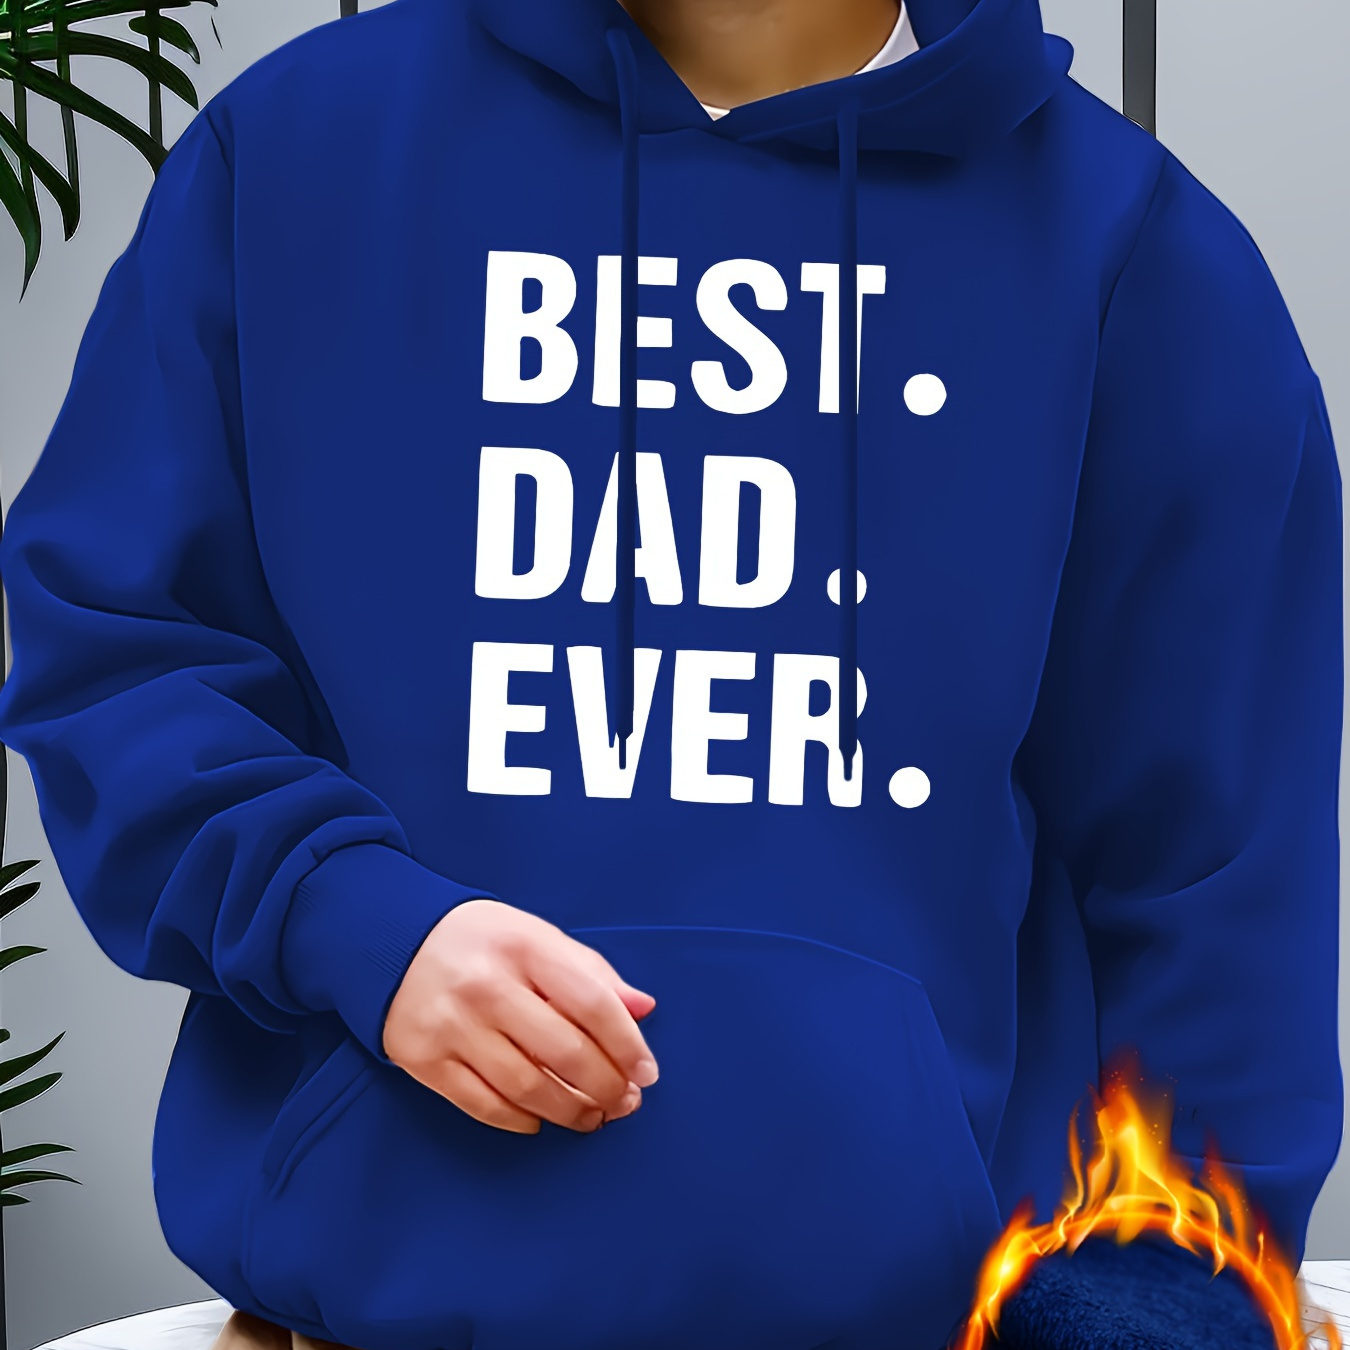 

"best Dad Ever" Print, Hoodies For Men, Graphic Sweatshirt With Kangaroo Pocket, Comfy Trendy Hooded Pullover, Mens Clothing For Fall Winter